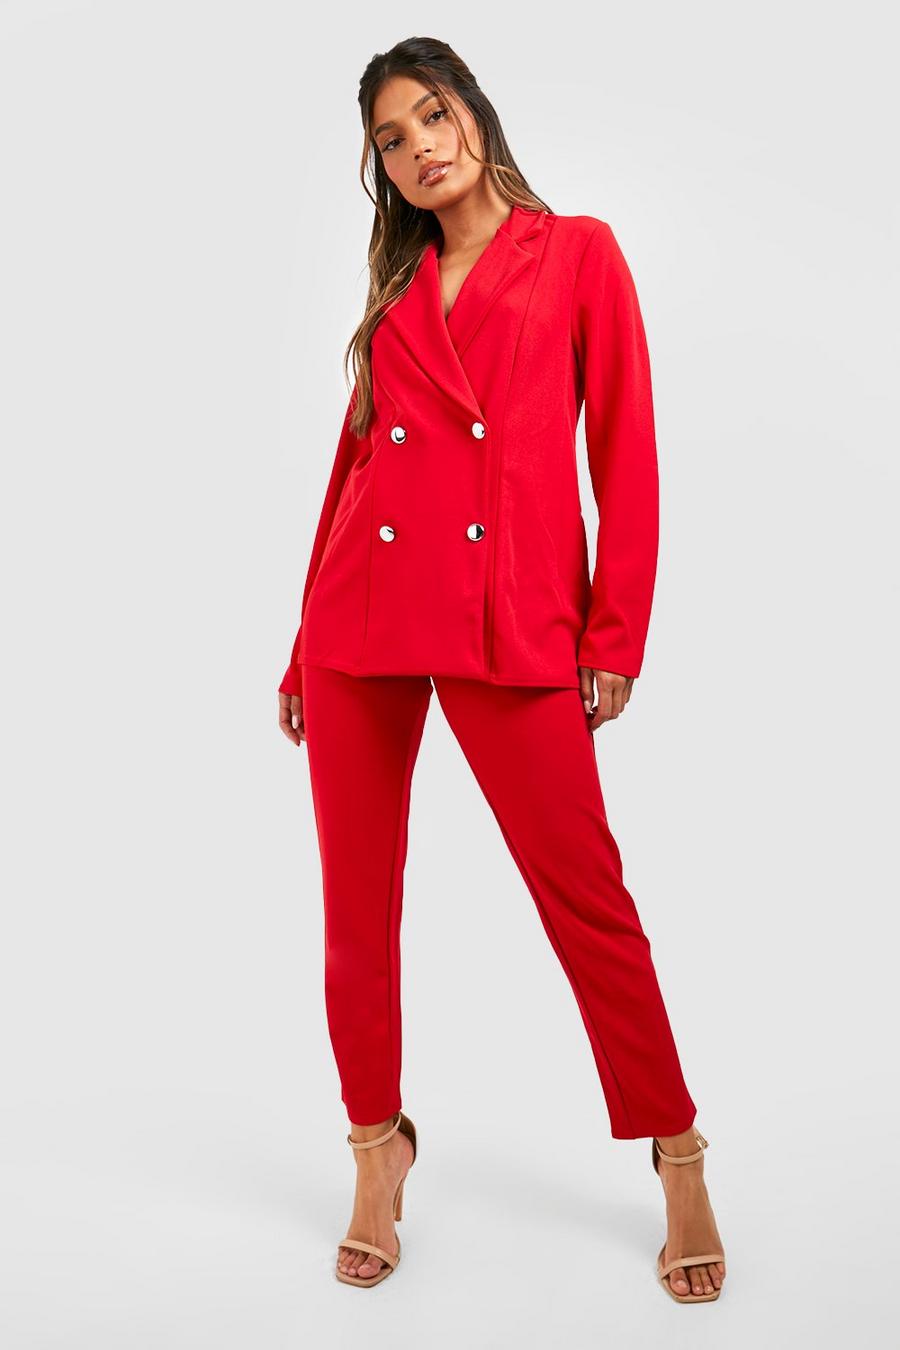 Red rouge Double Breasted Blazer And Trouser Suit Set